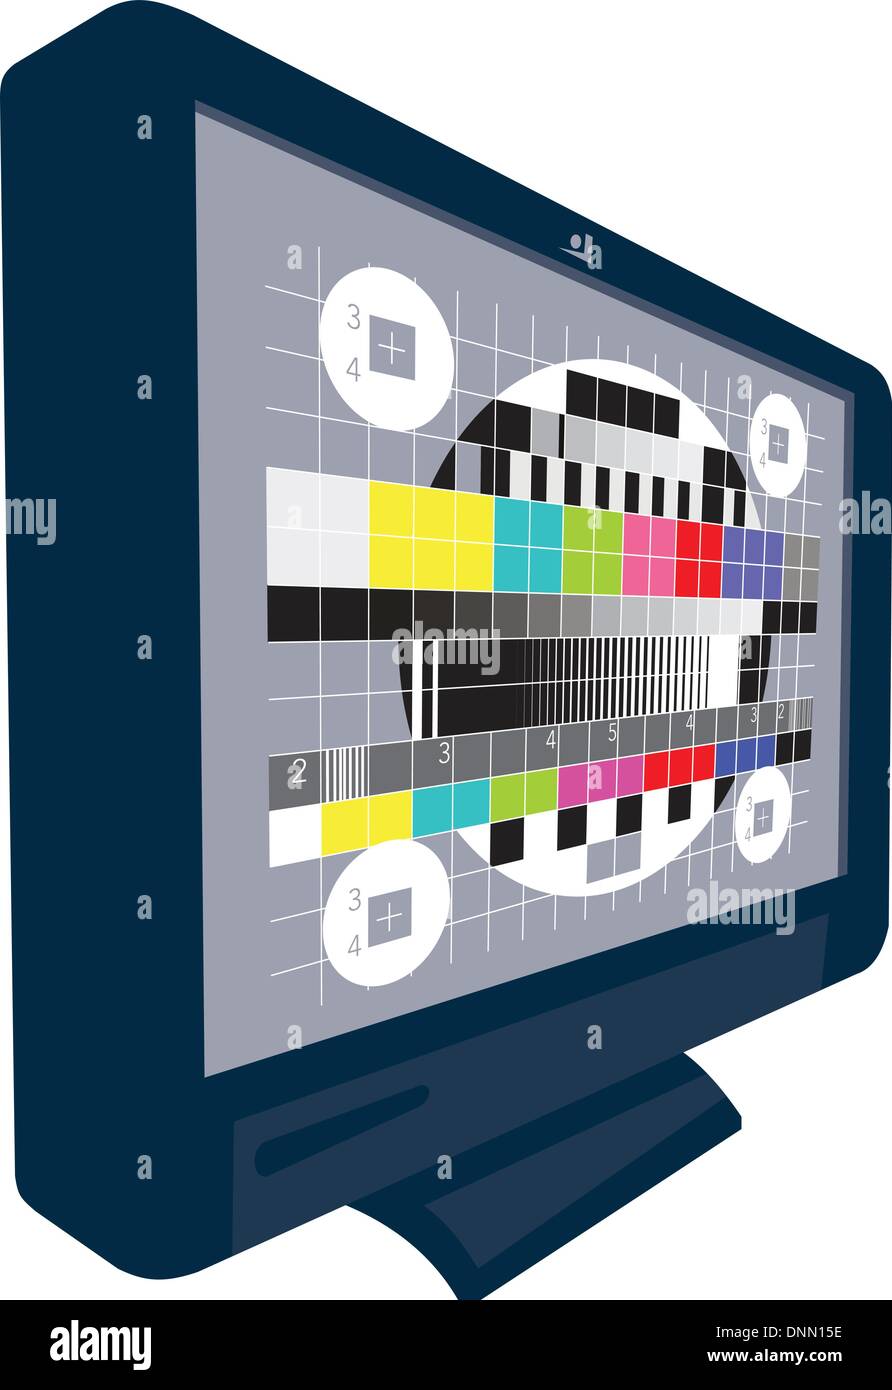 Illustration of an LCD Plasma television TV set on isolated white background. with test signal pattern. Stock Vector